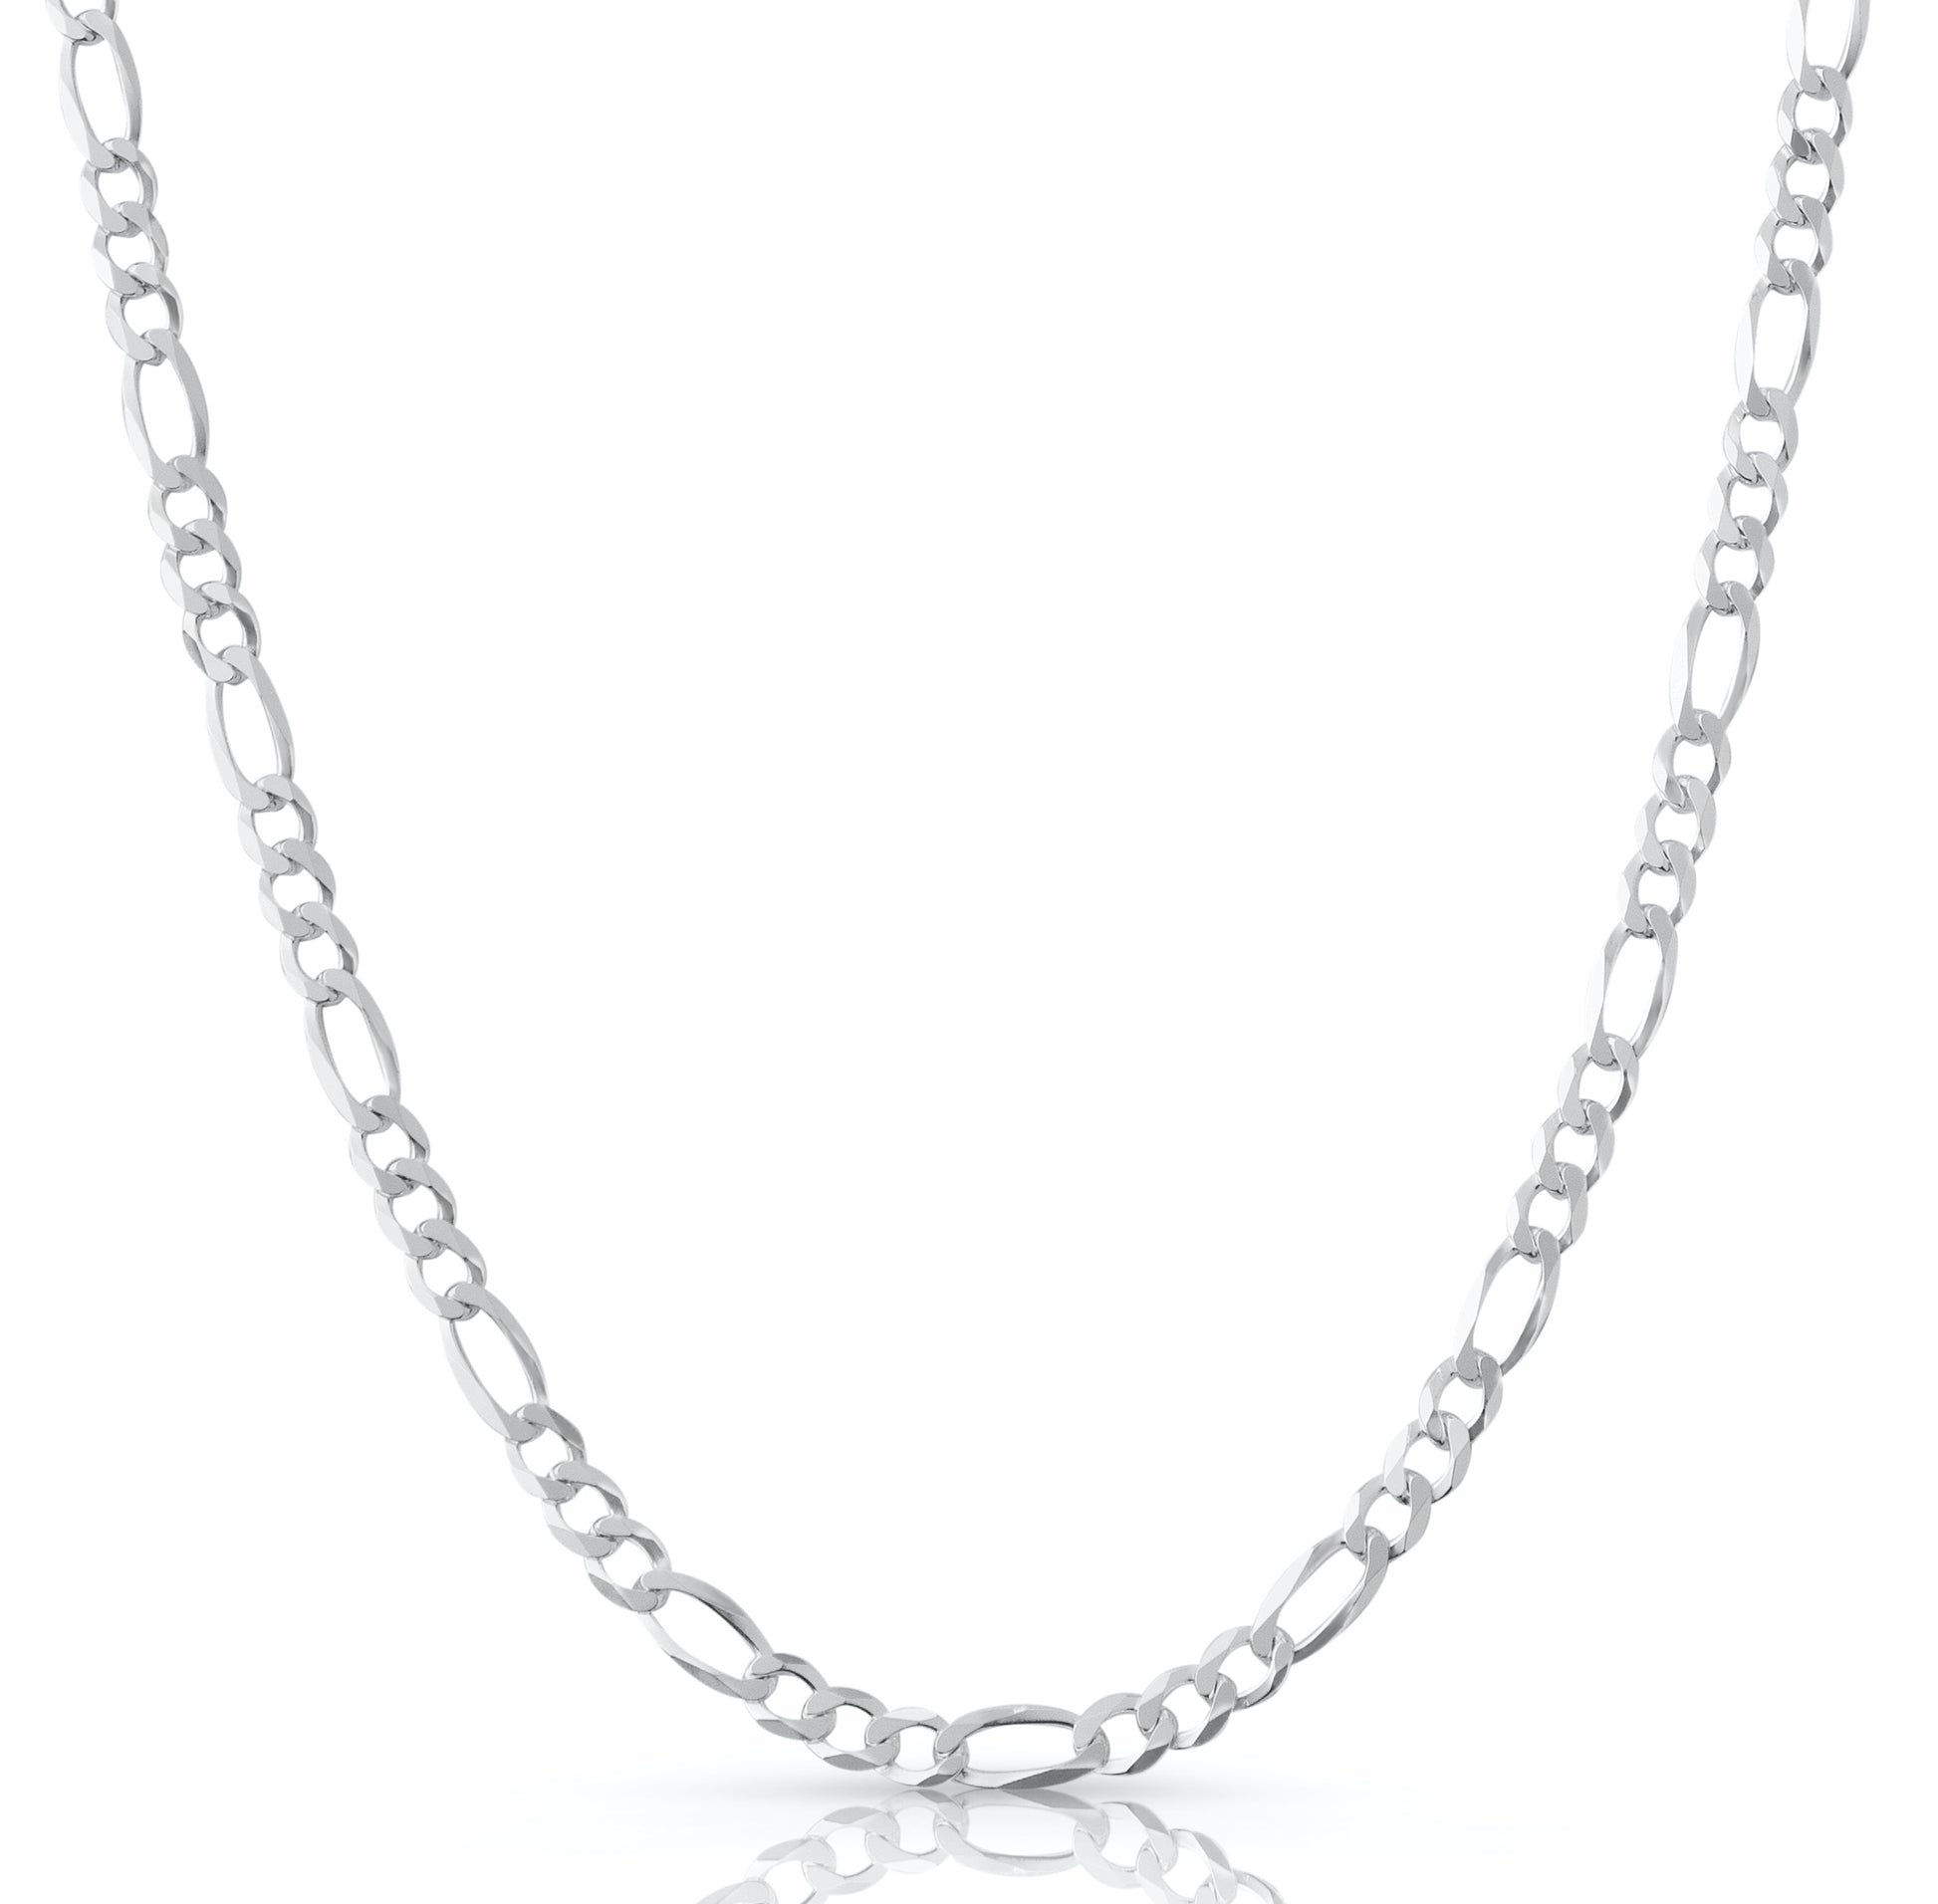 Mens Fine Jewelry Solid 925 Sterling Silver 6MM Figaro Link Chain Necklaces